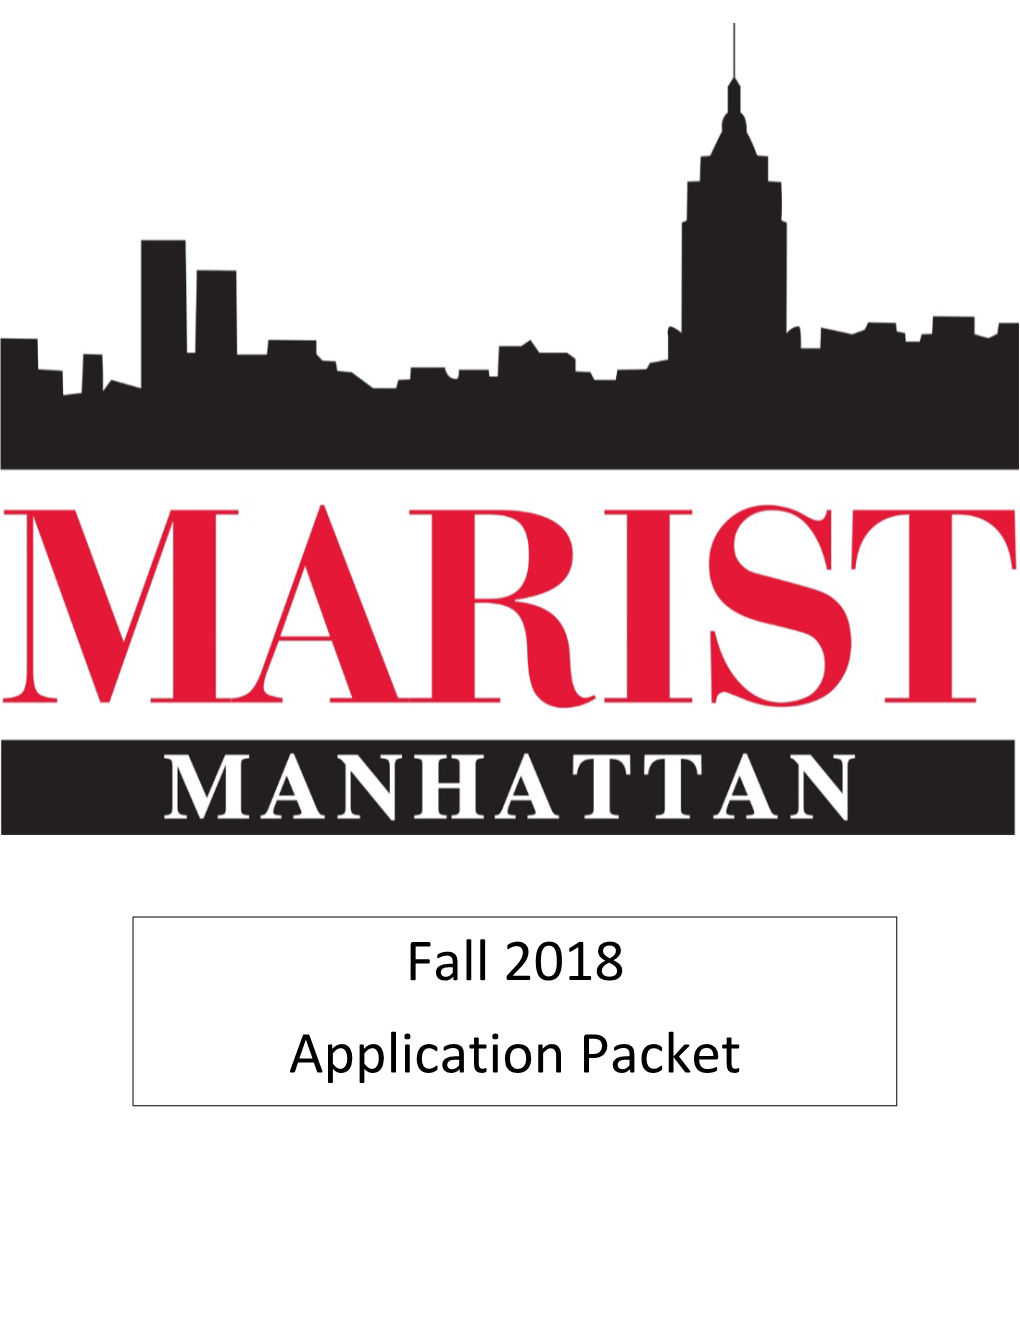 Fall 2018 Application Packet